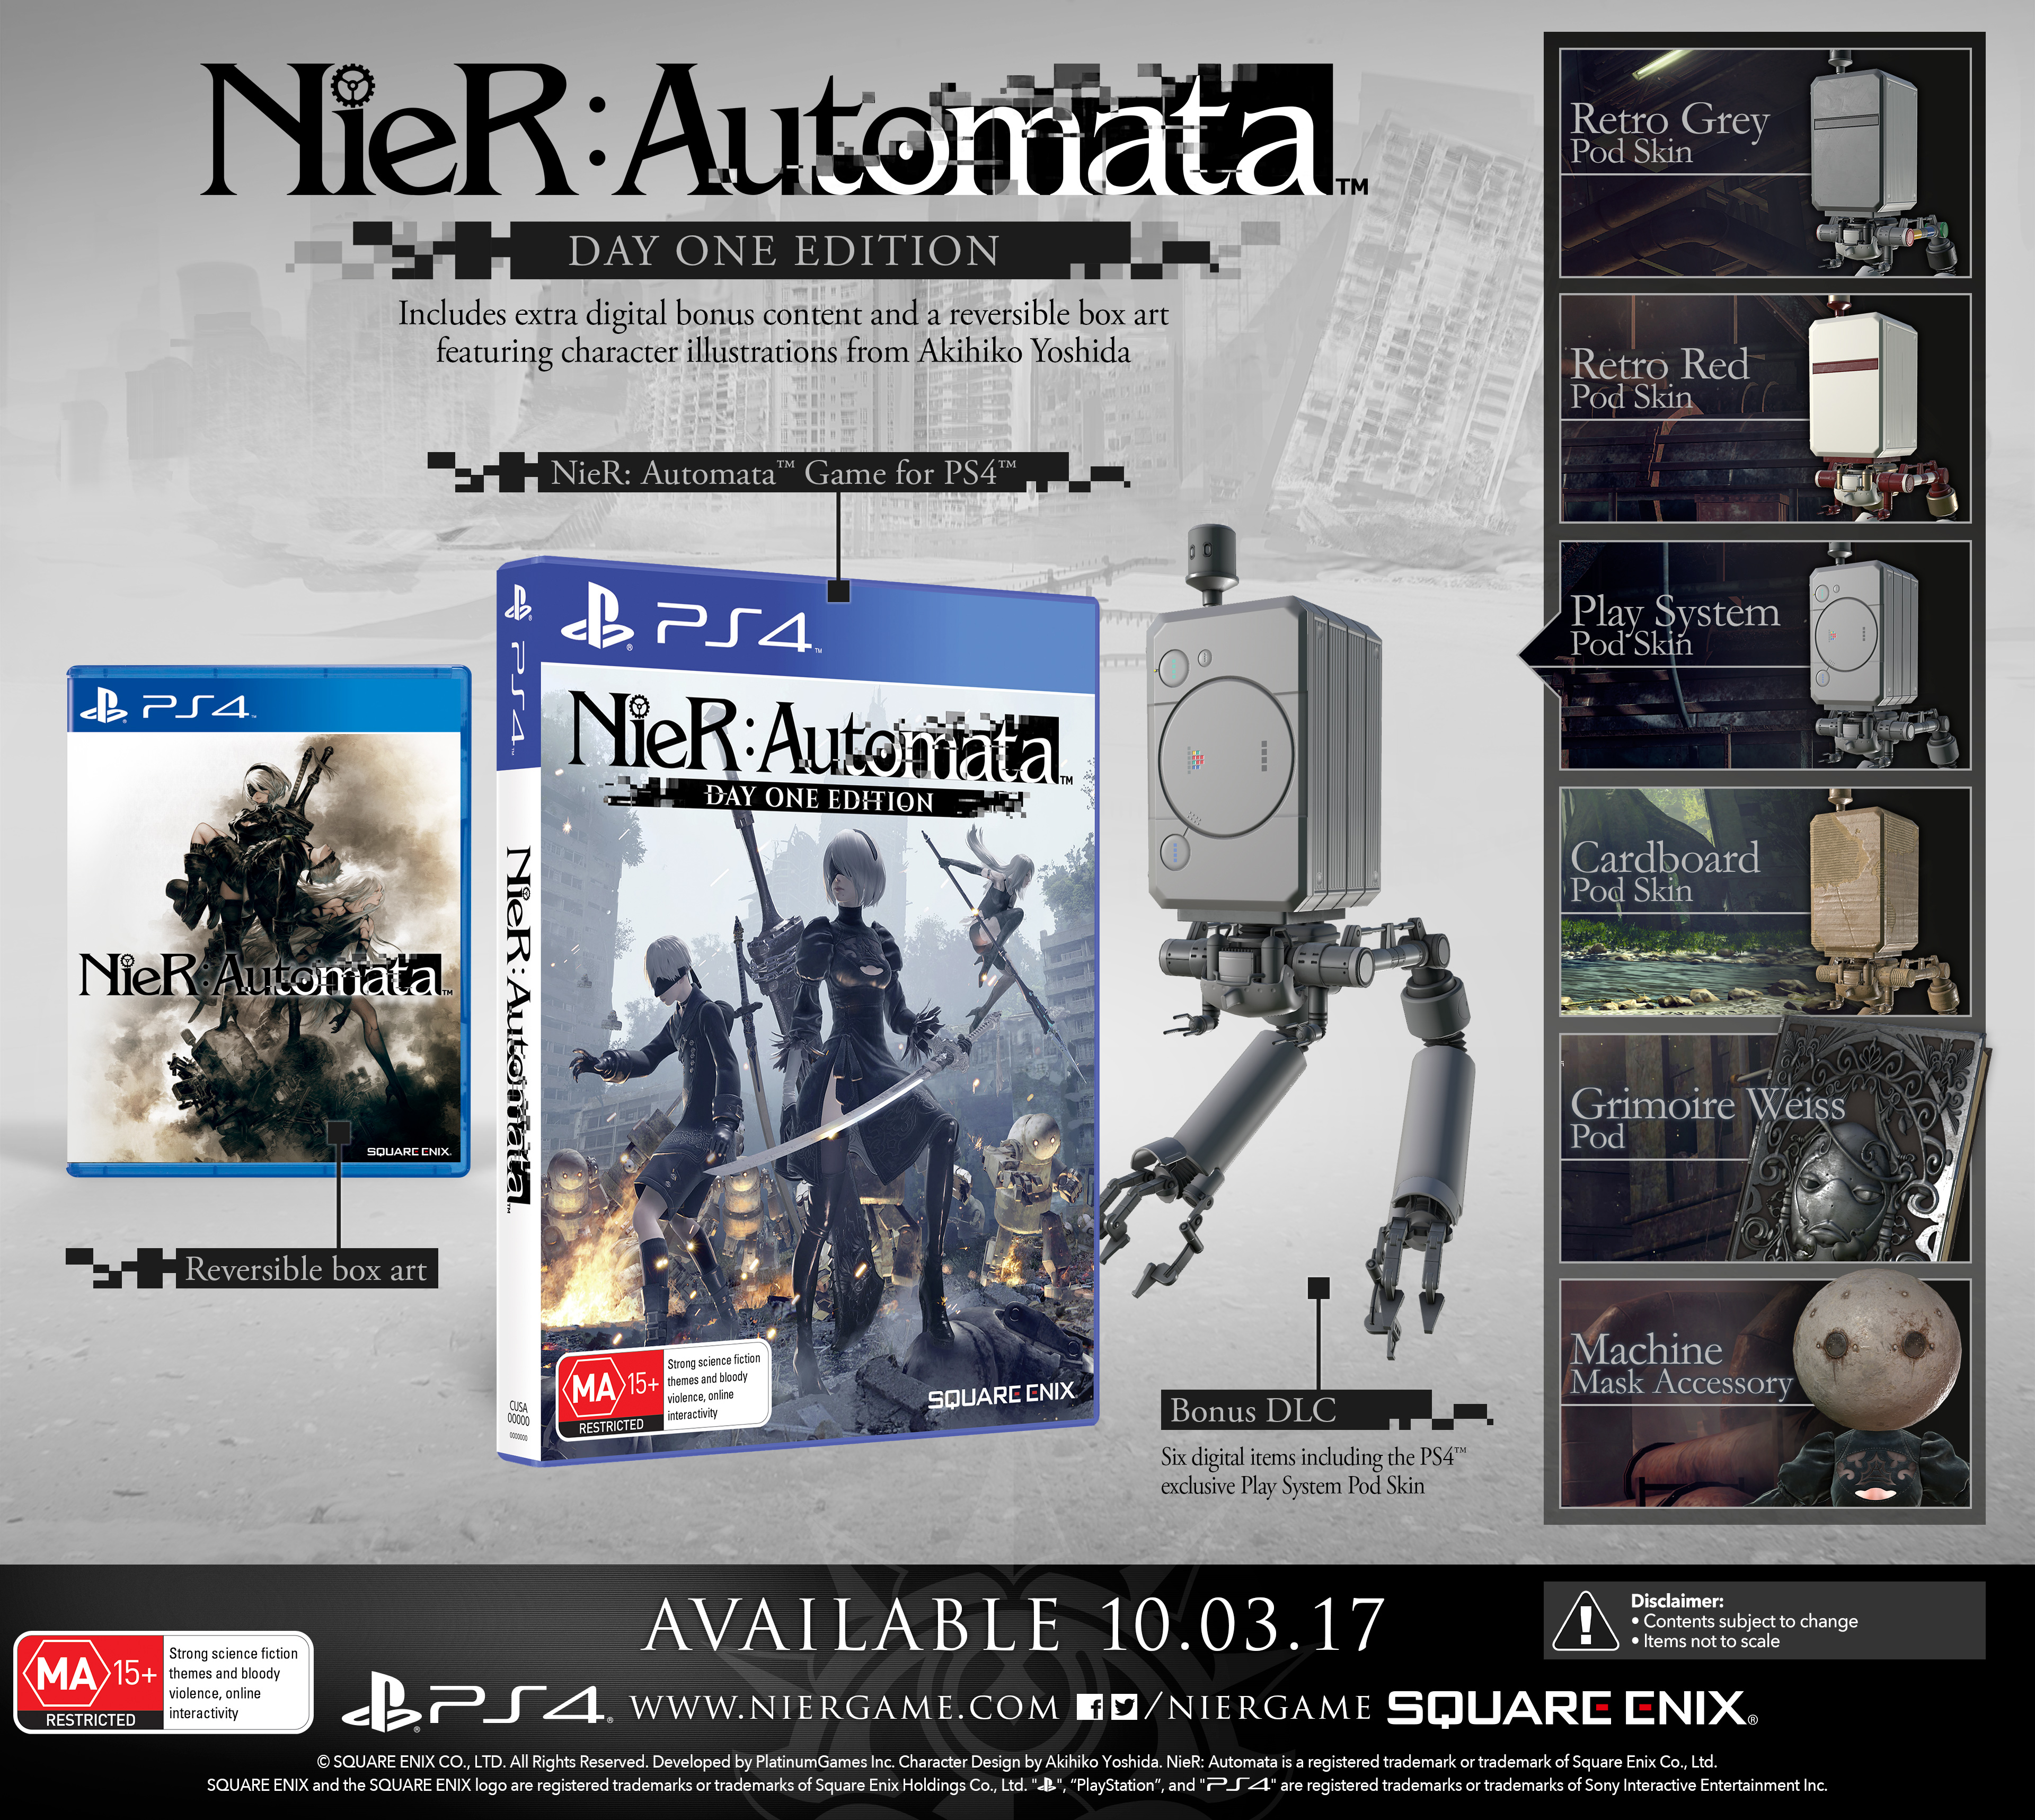 Nier: Automata Release Date And Day One Edition Announced